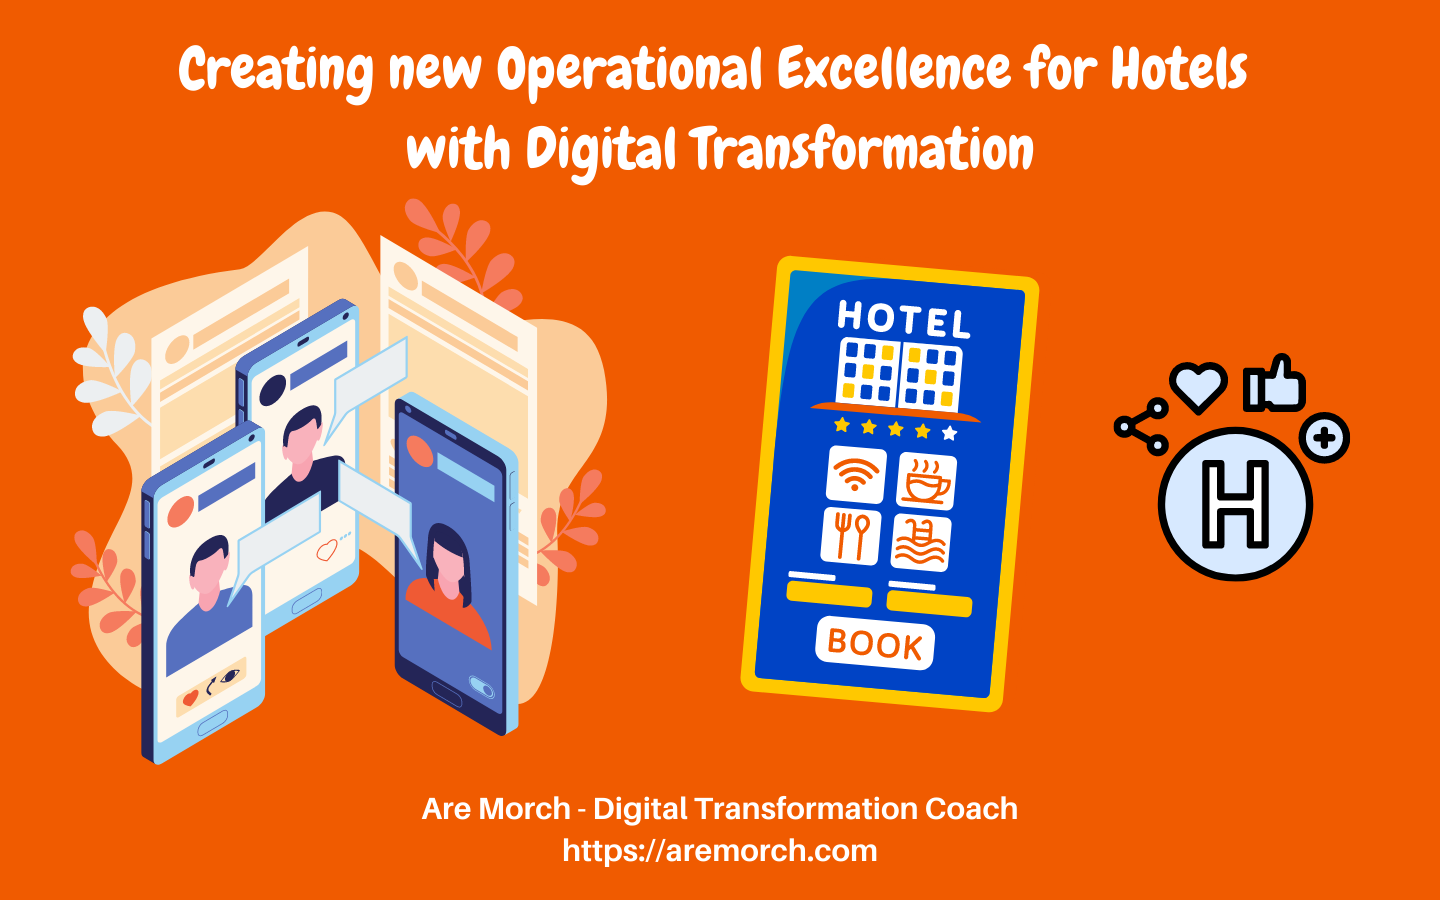 Creating new Operational Excellence for Hotels with Digital Transformation